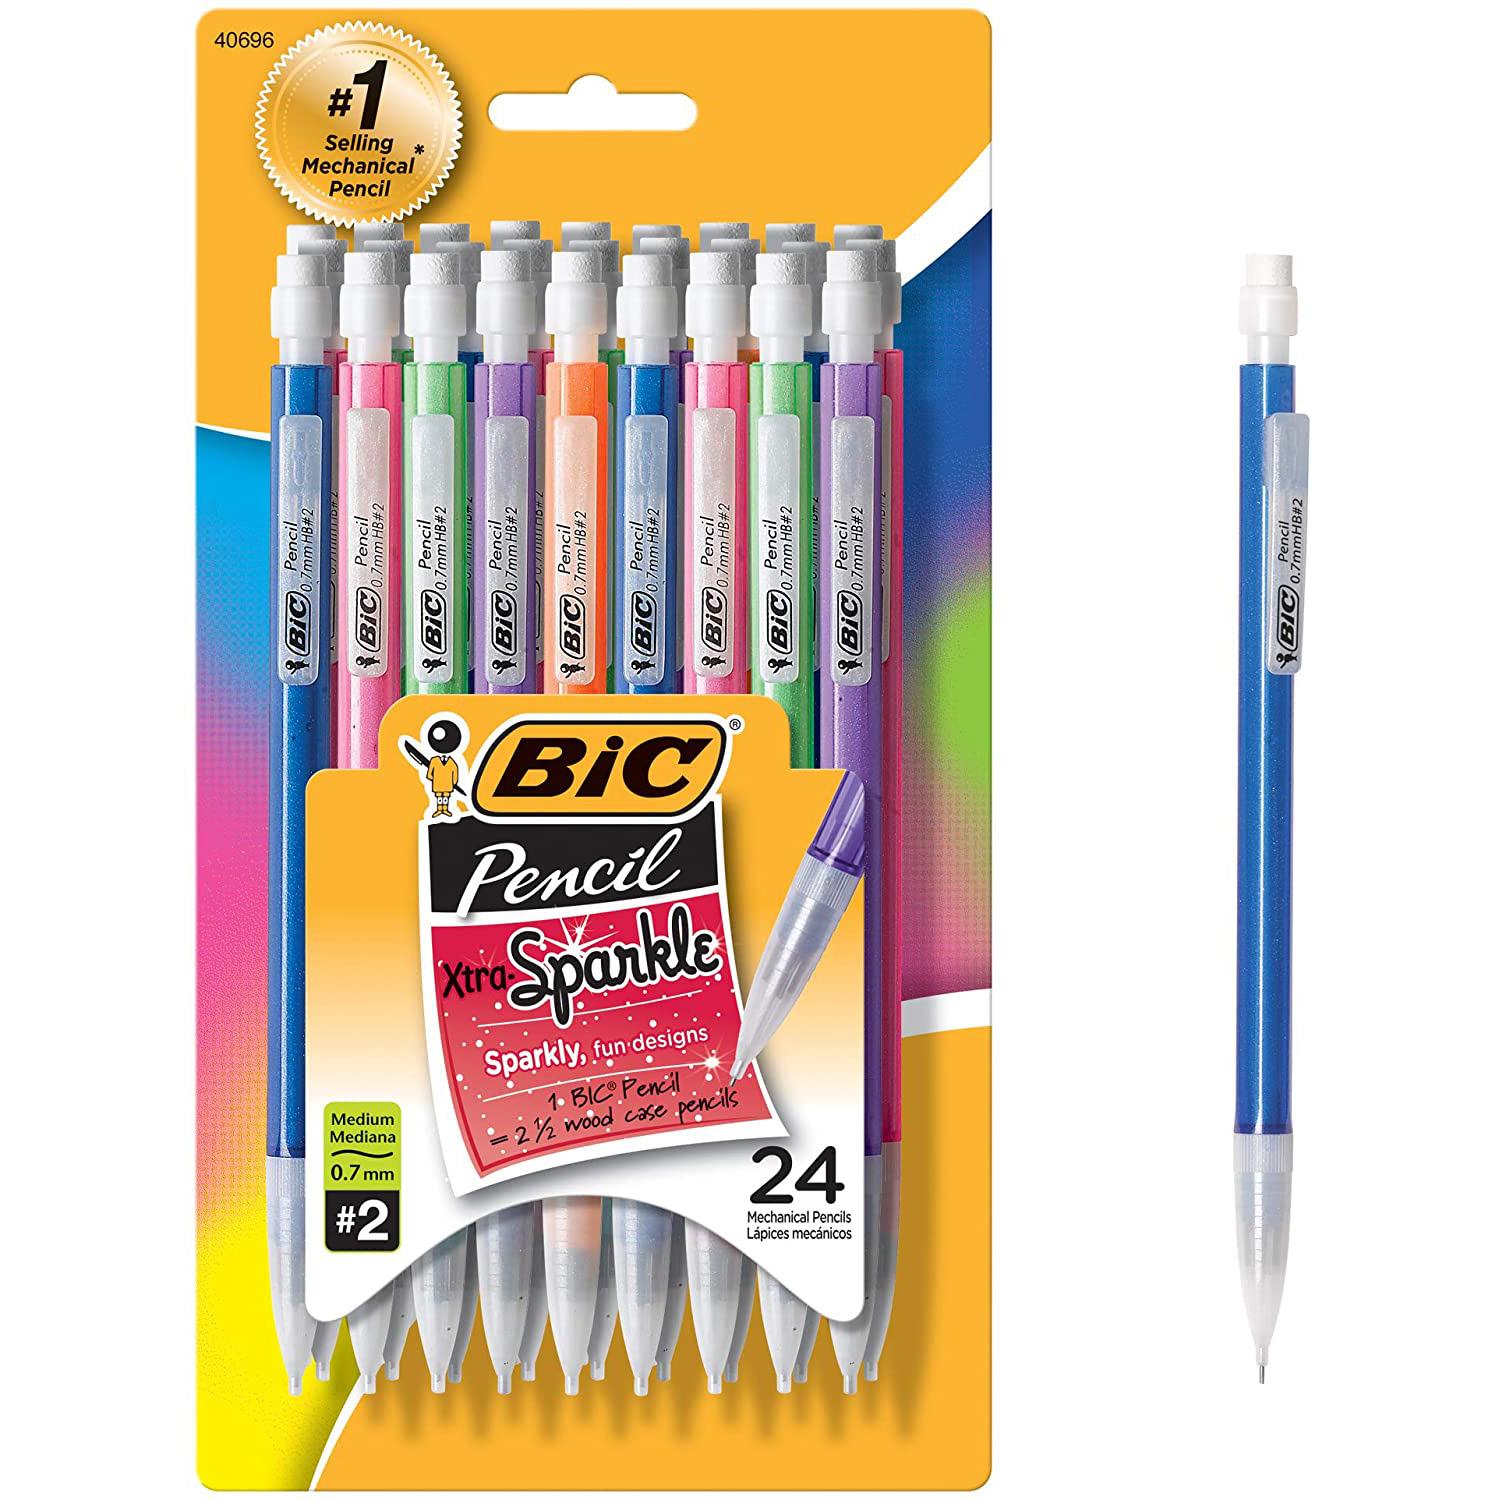 24 BIC Xtra-Sparkle Mechanical Pencils for $2.65 Shipped